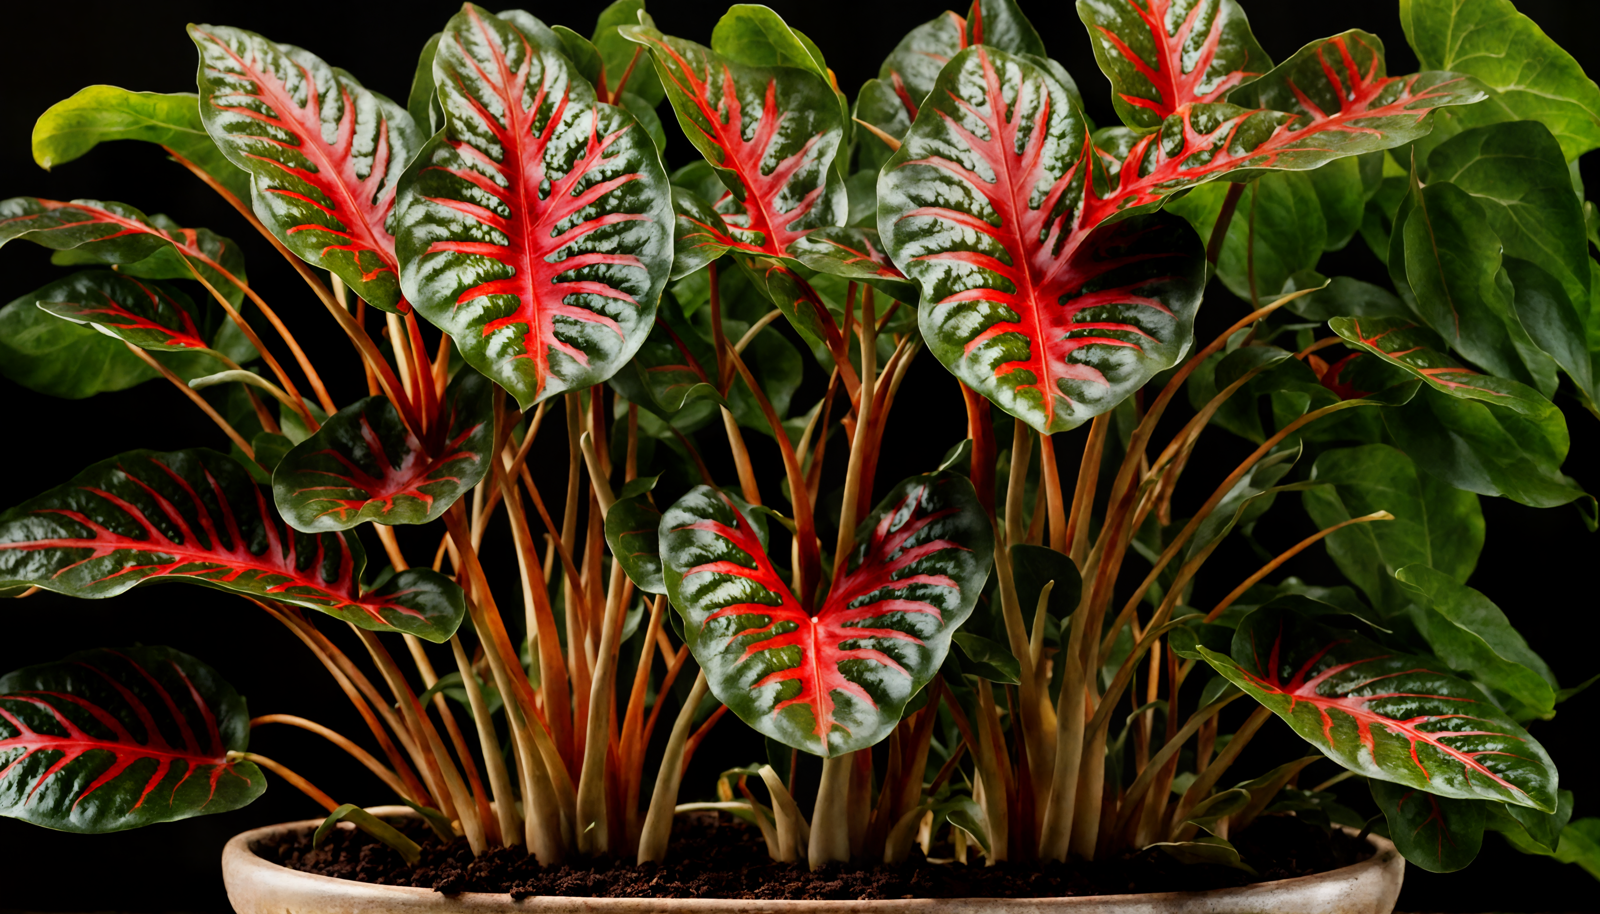 Vibrant red Caladium bicolor leaves in a bowl planter, with clear lighting against a dark background.